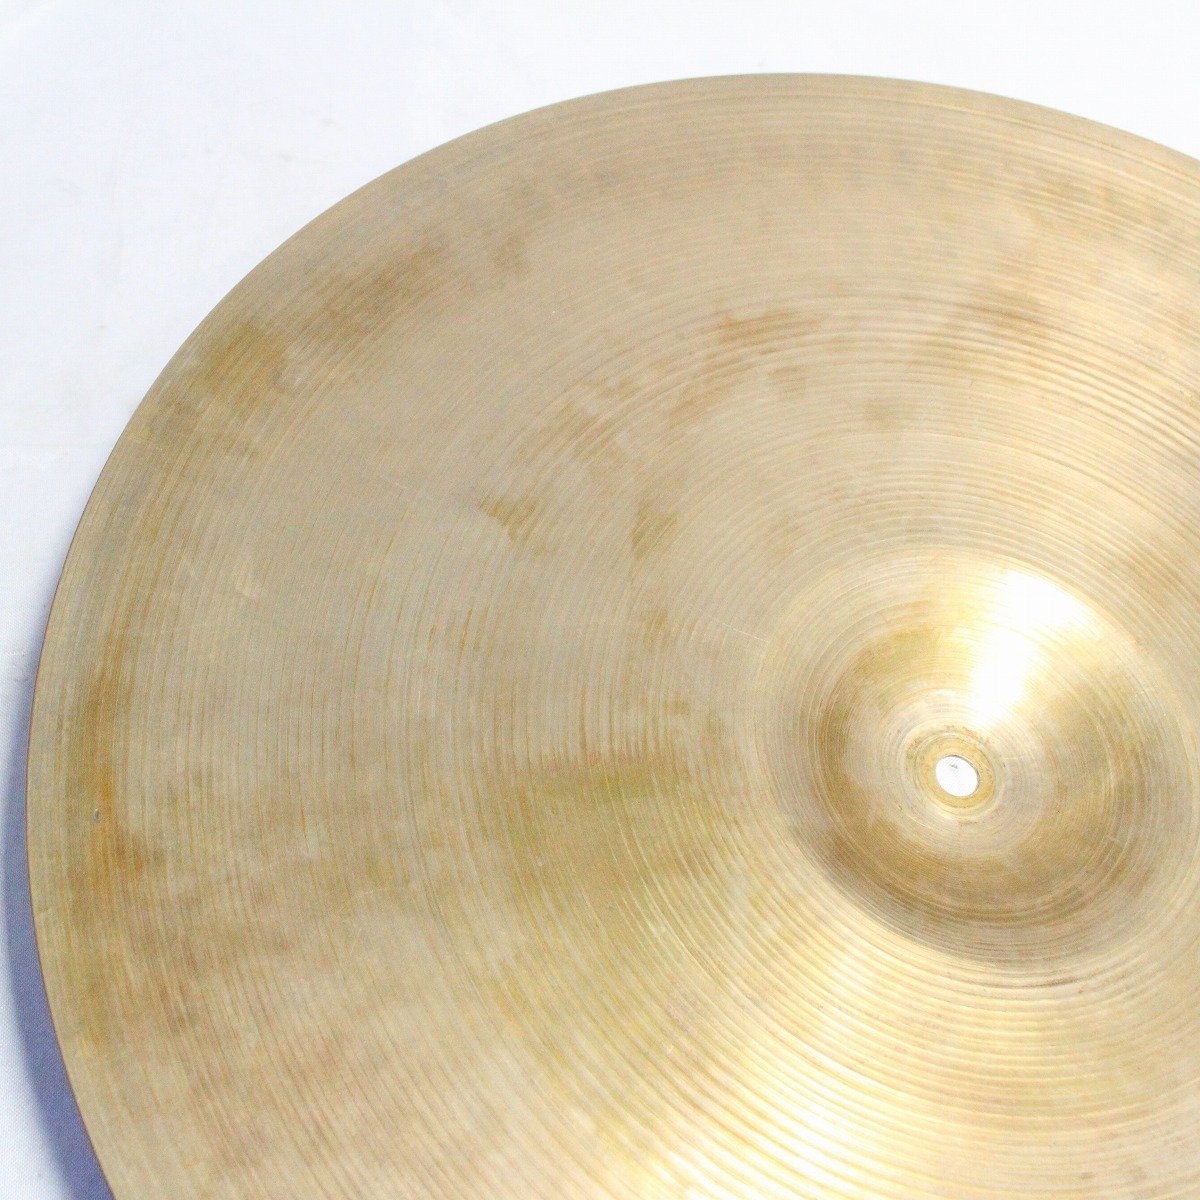 USED ZILDJIAN / Late50s A Small Stamp 20" 2214g Old A Ride Cymbal [08]